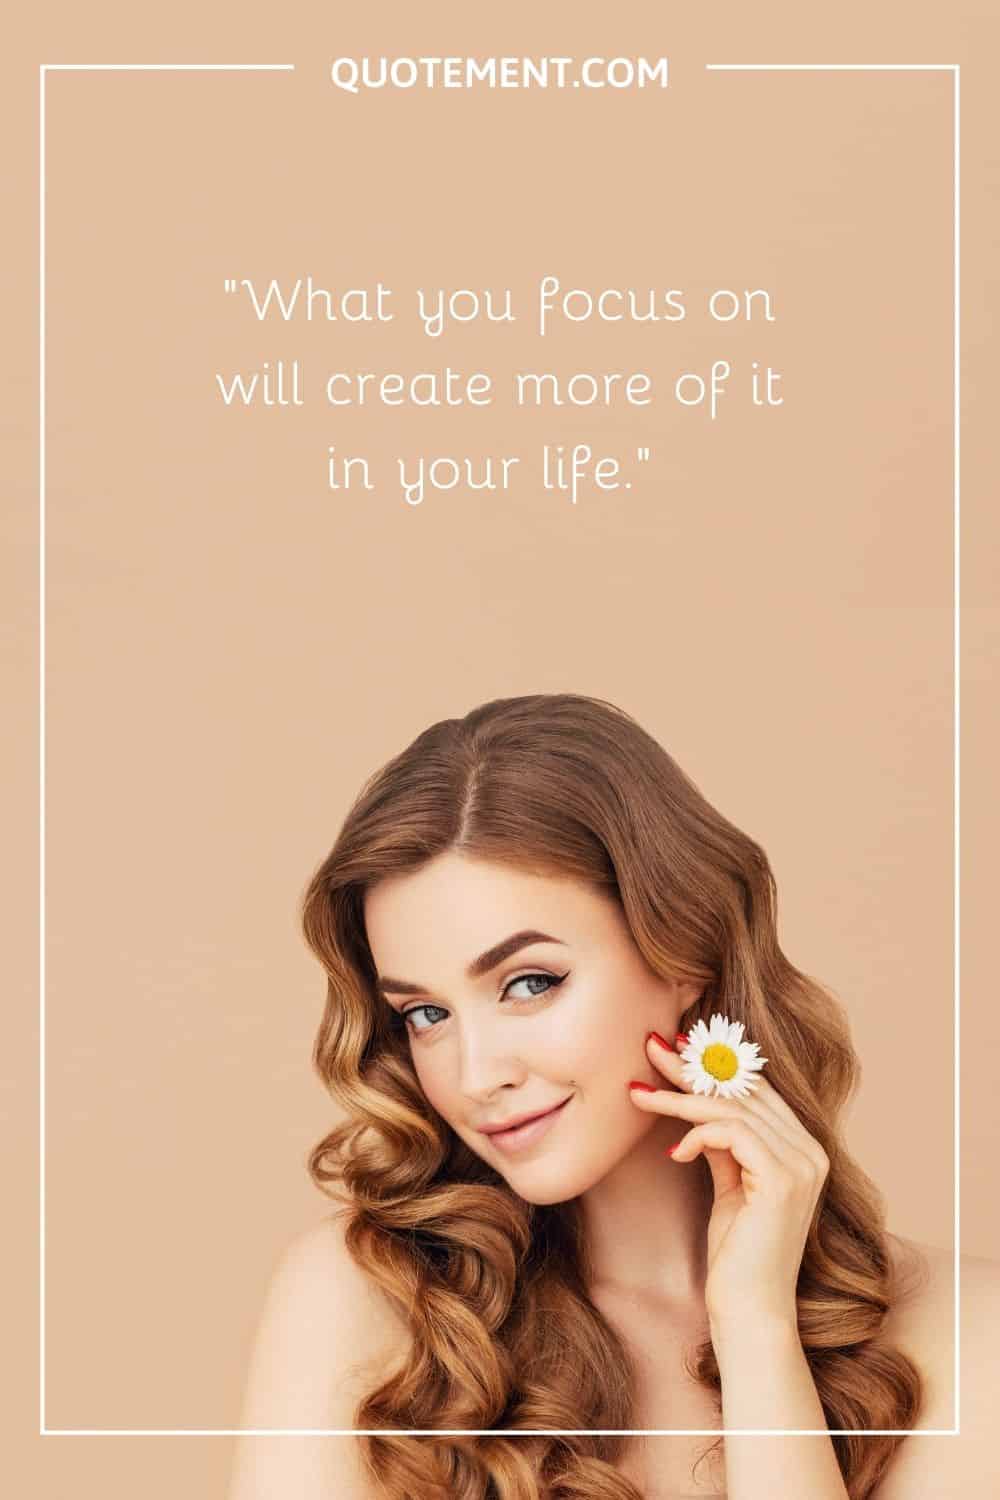 What you focus on will create more of it in your life.